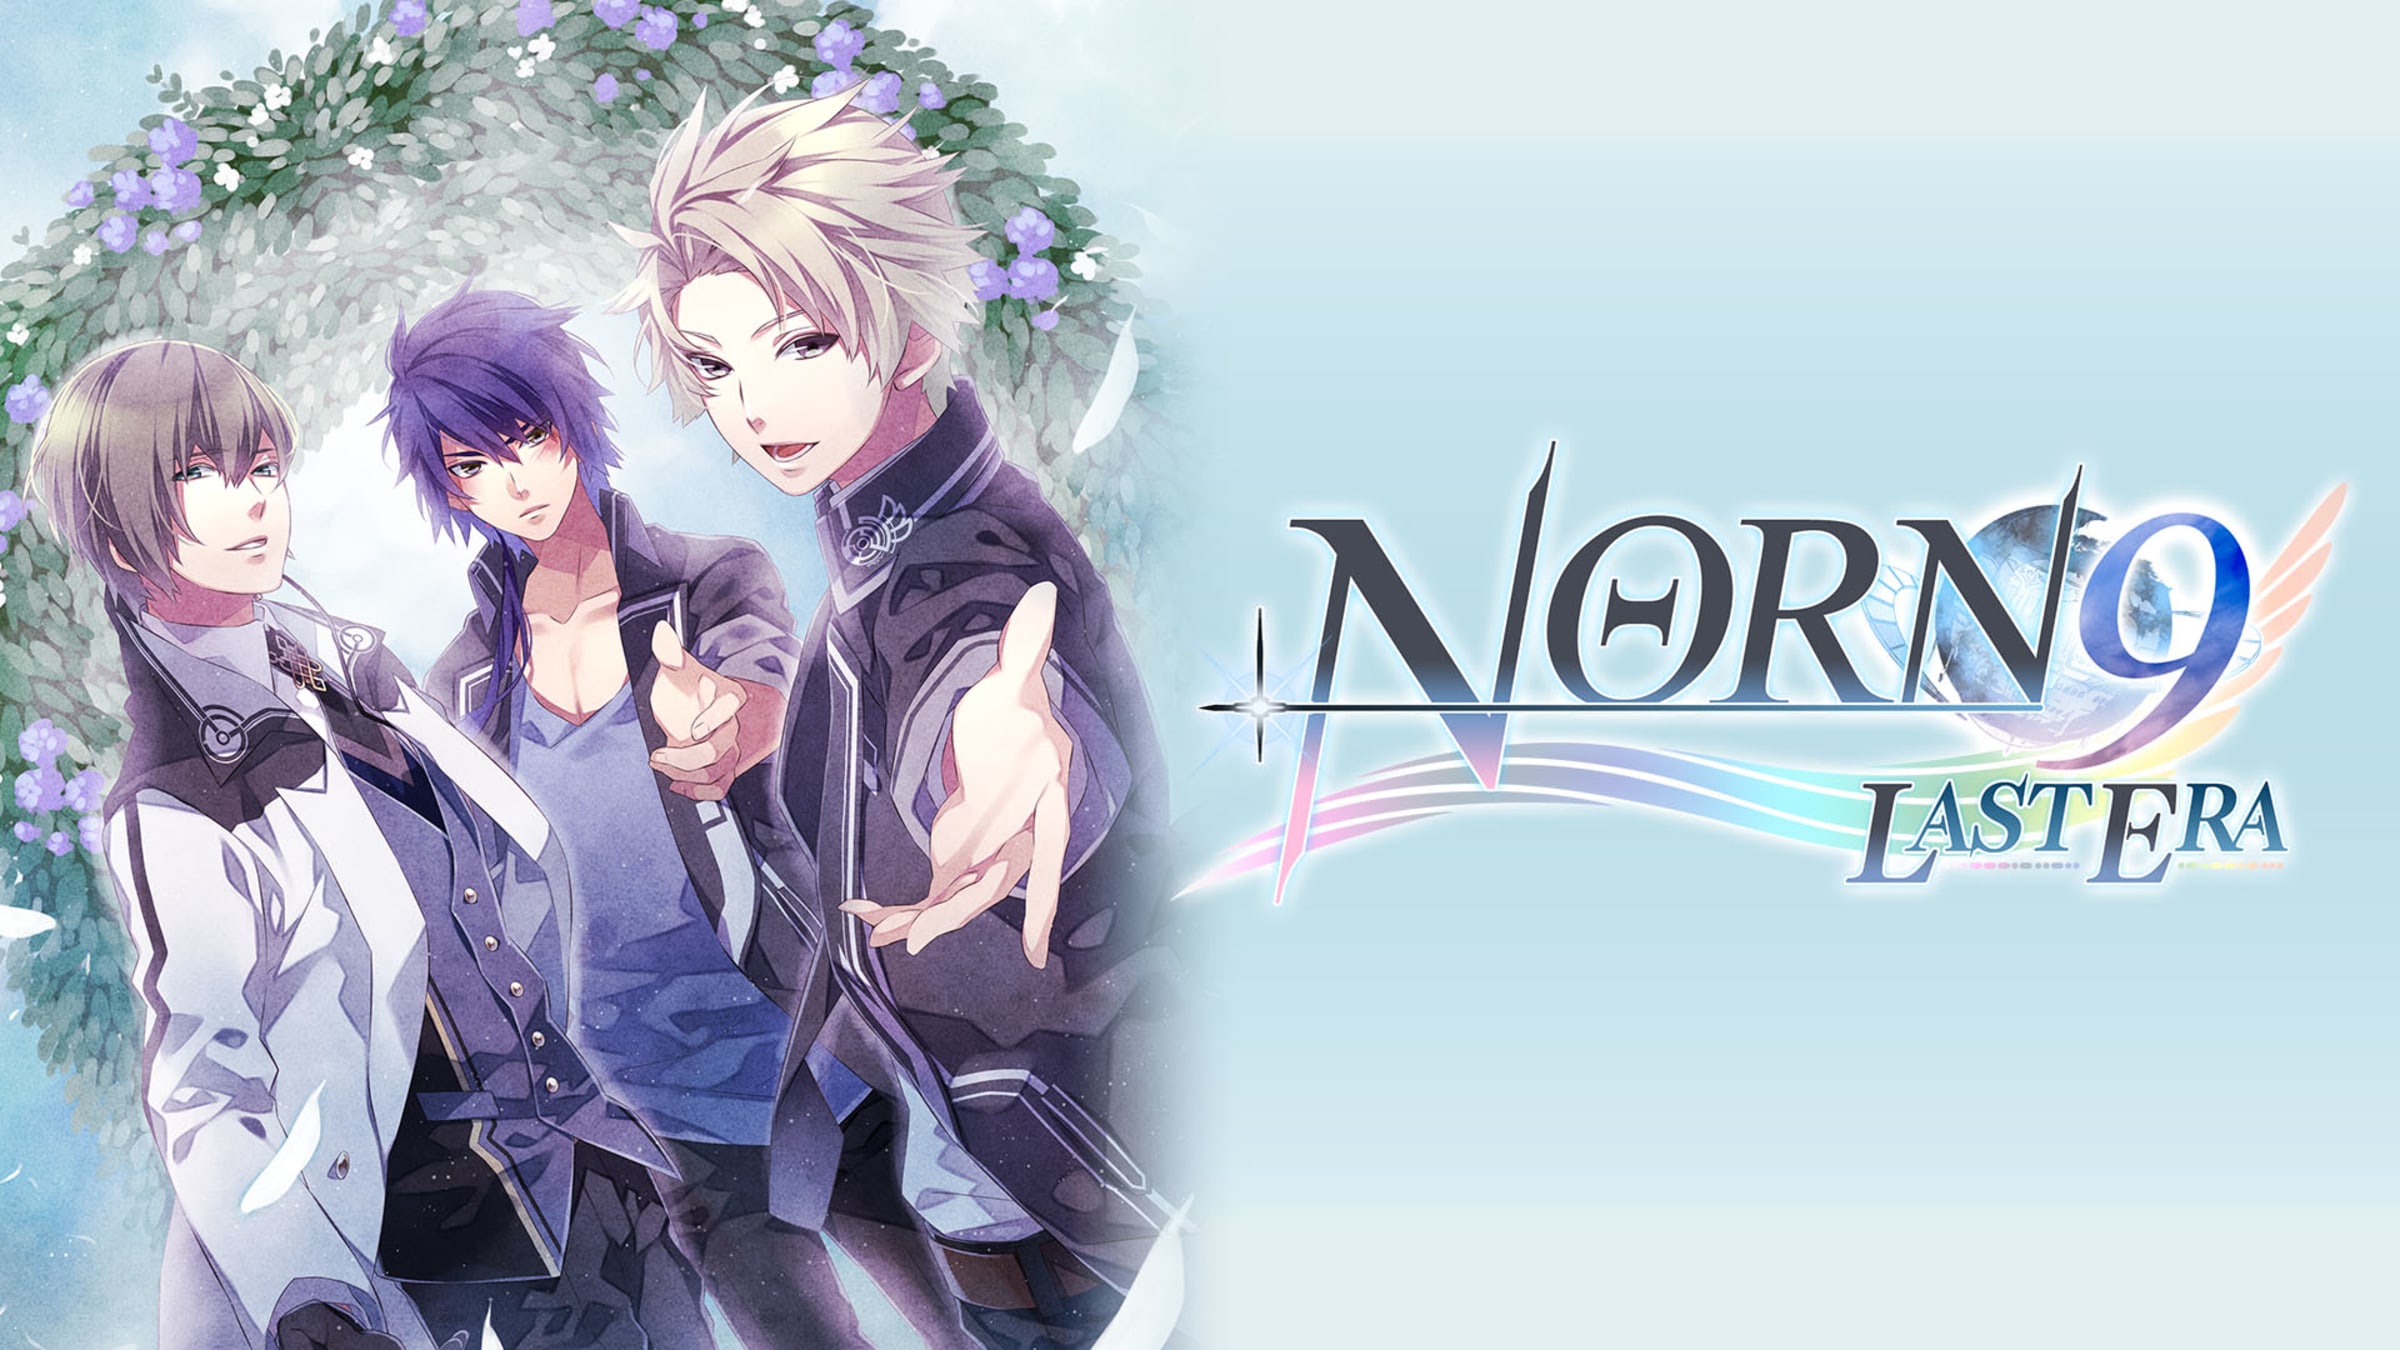 Norn9: Last Era for Nintendo Switch - Nintendo Official Site